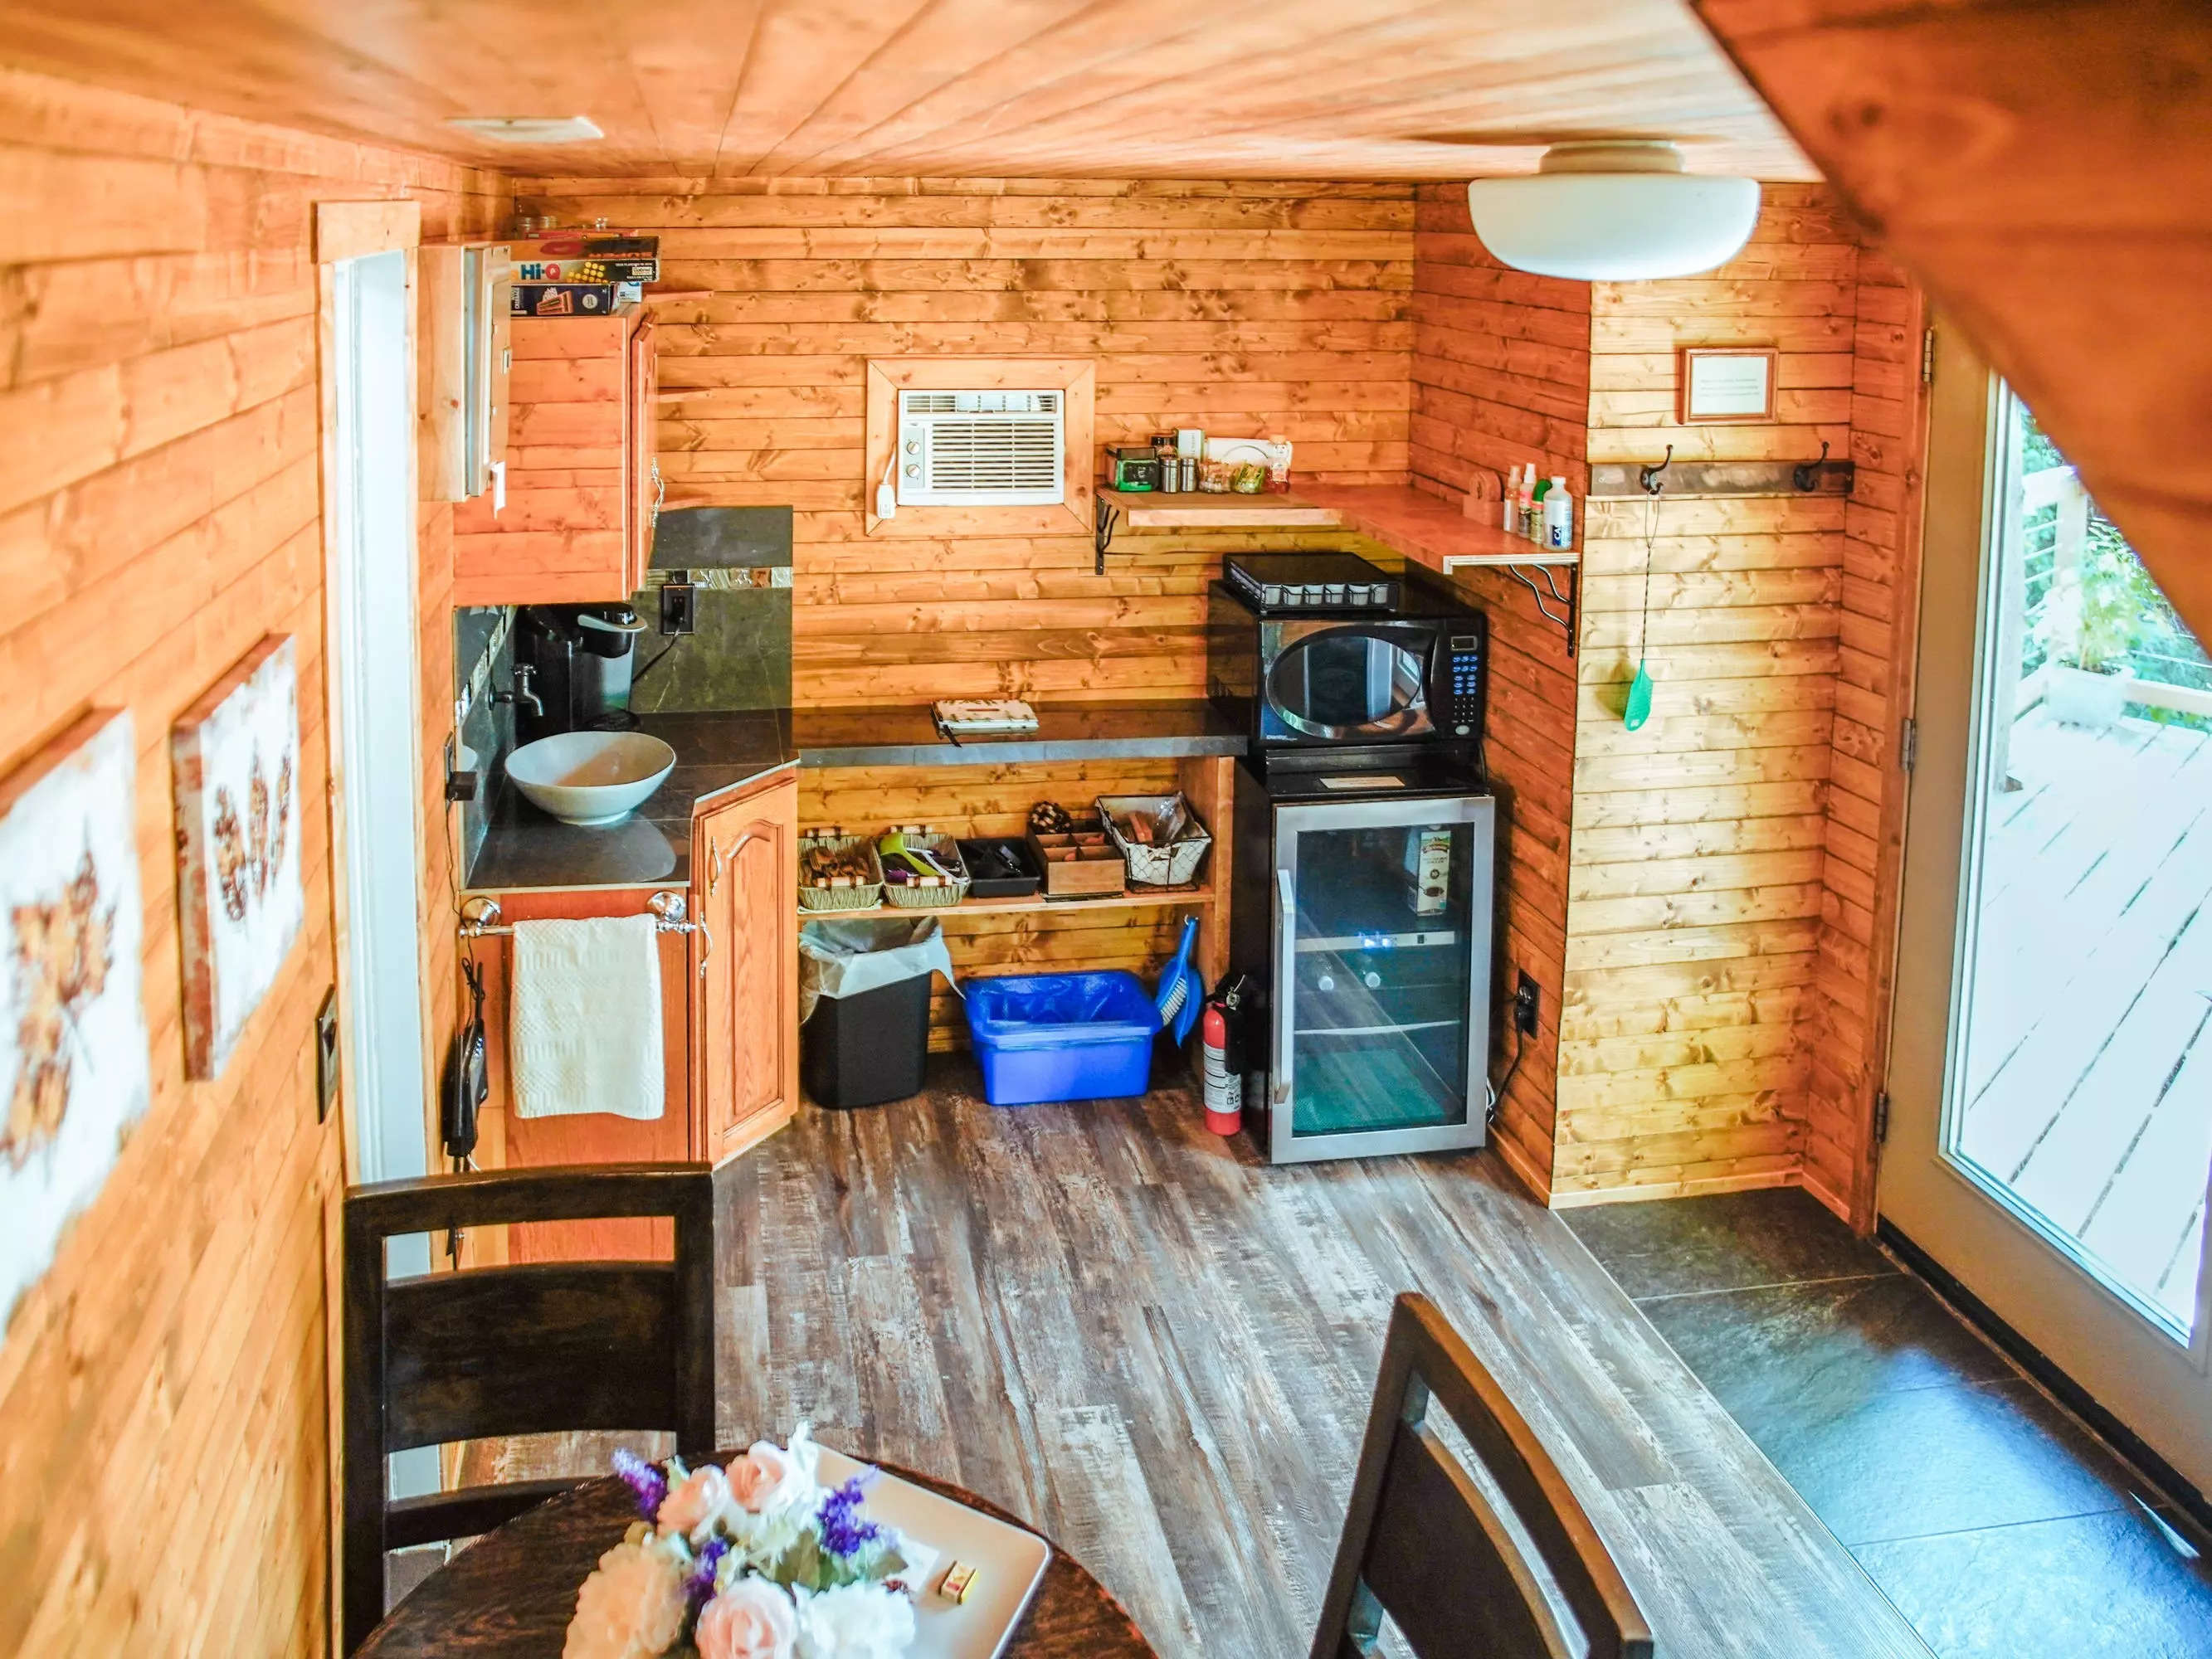 Inside the treehouse kitchen